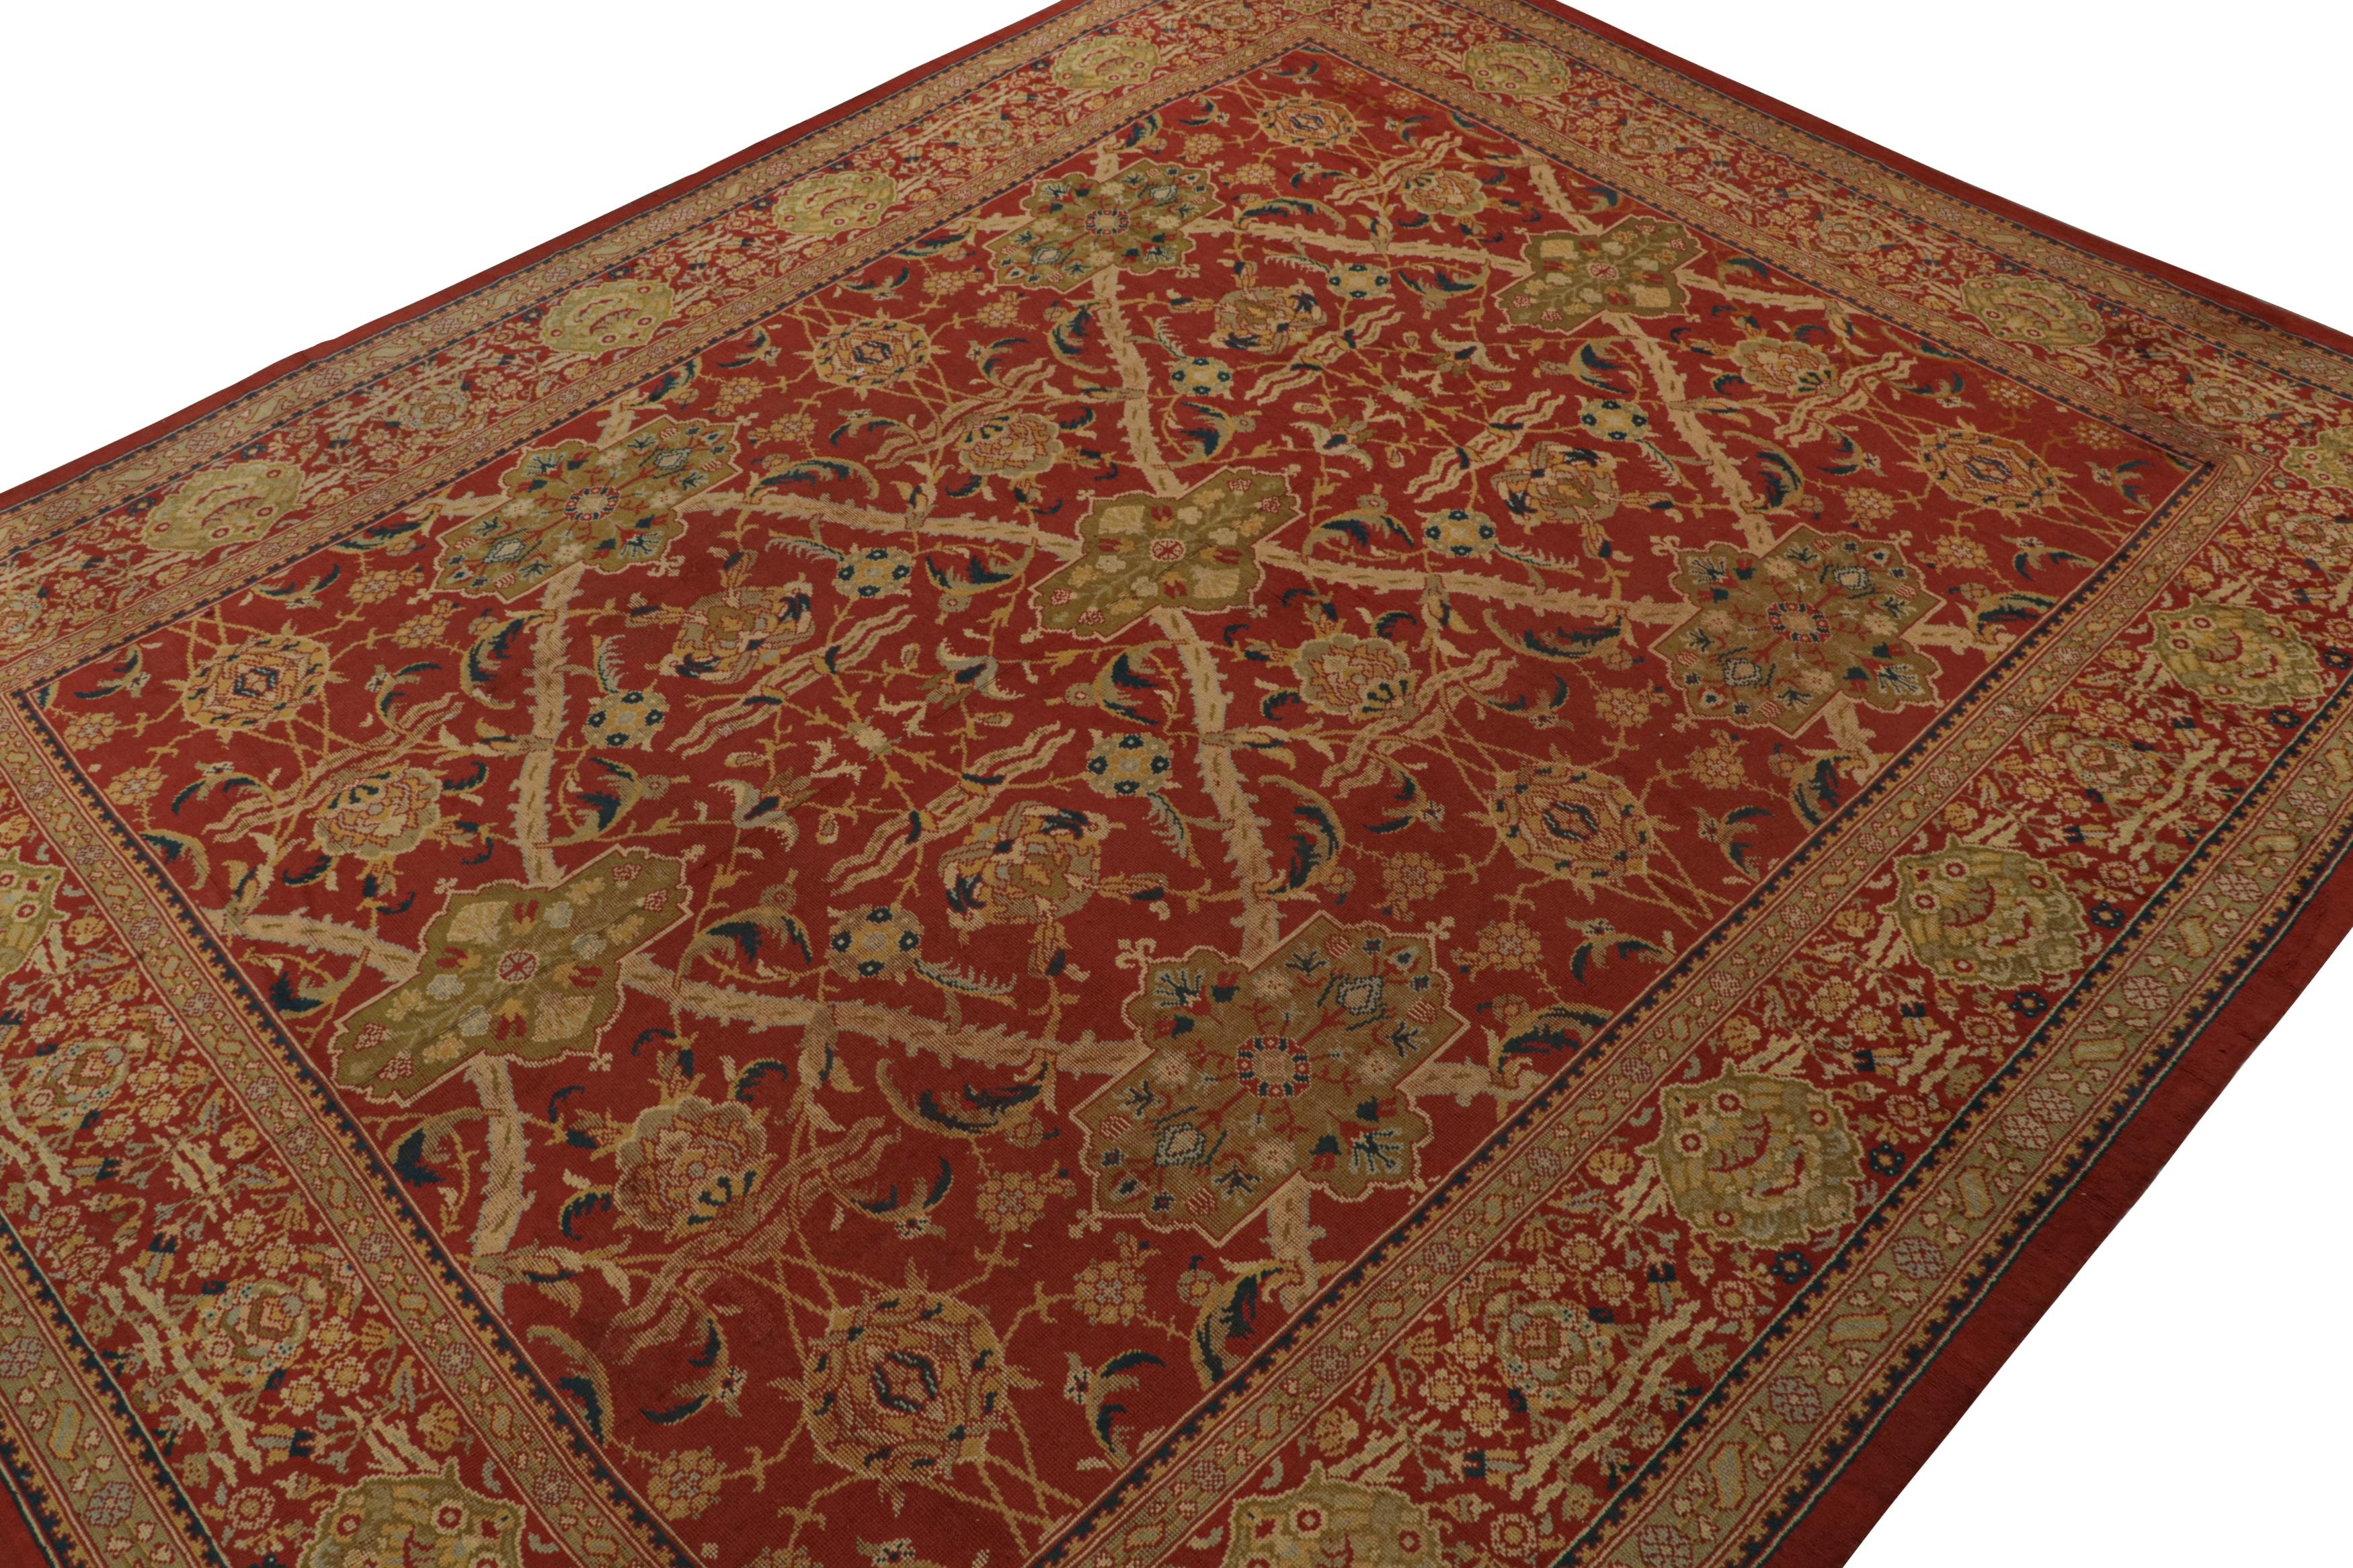 Hand-knotted in wool circa 1860-1870, this 14x17 antique Axminster rug from England is a rare piece of pre-Arts & Crafts sensibilities.  

On the design:

Inspired by Sultanabad rugs like other works leading up to the movement, this European rug